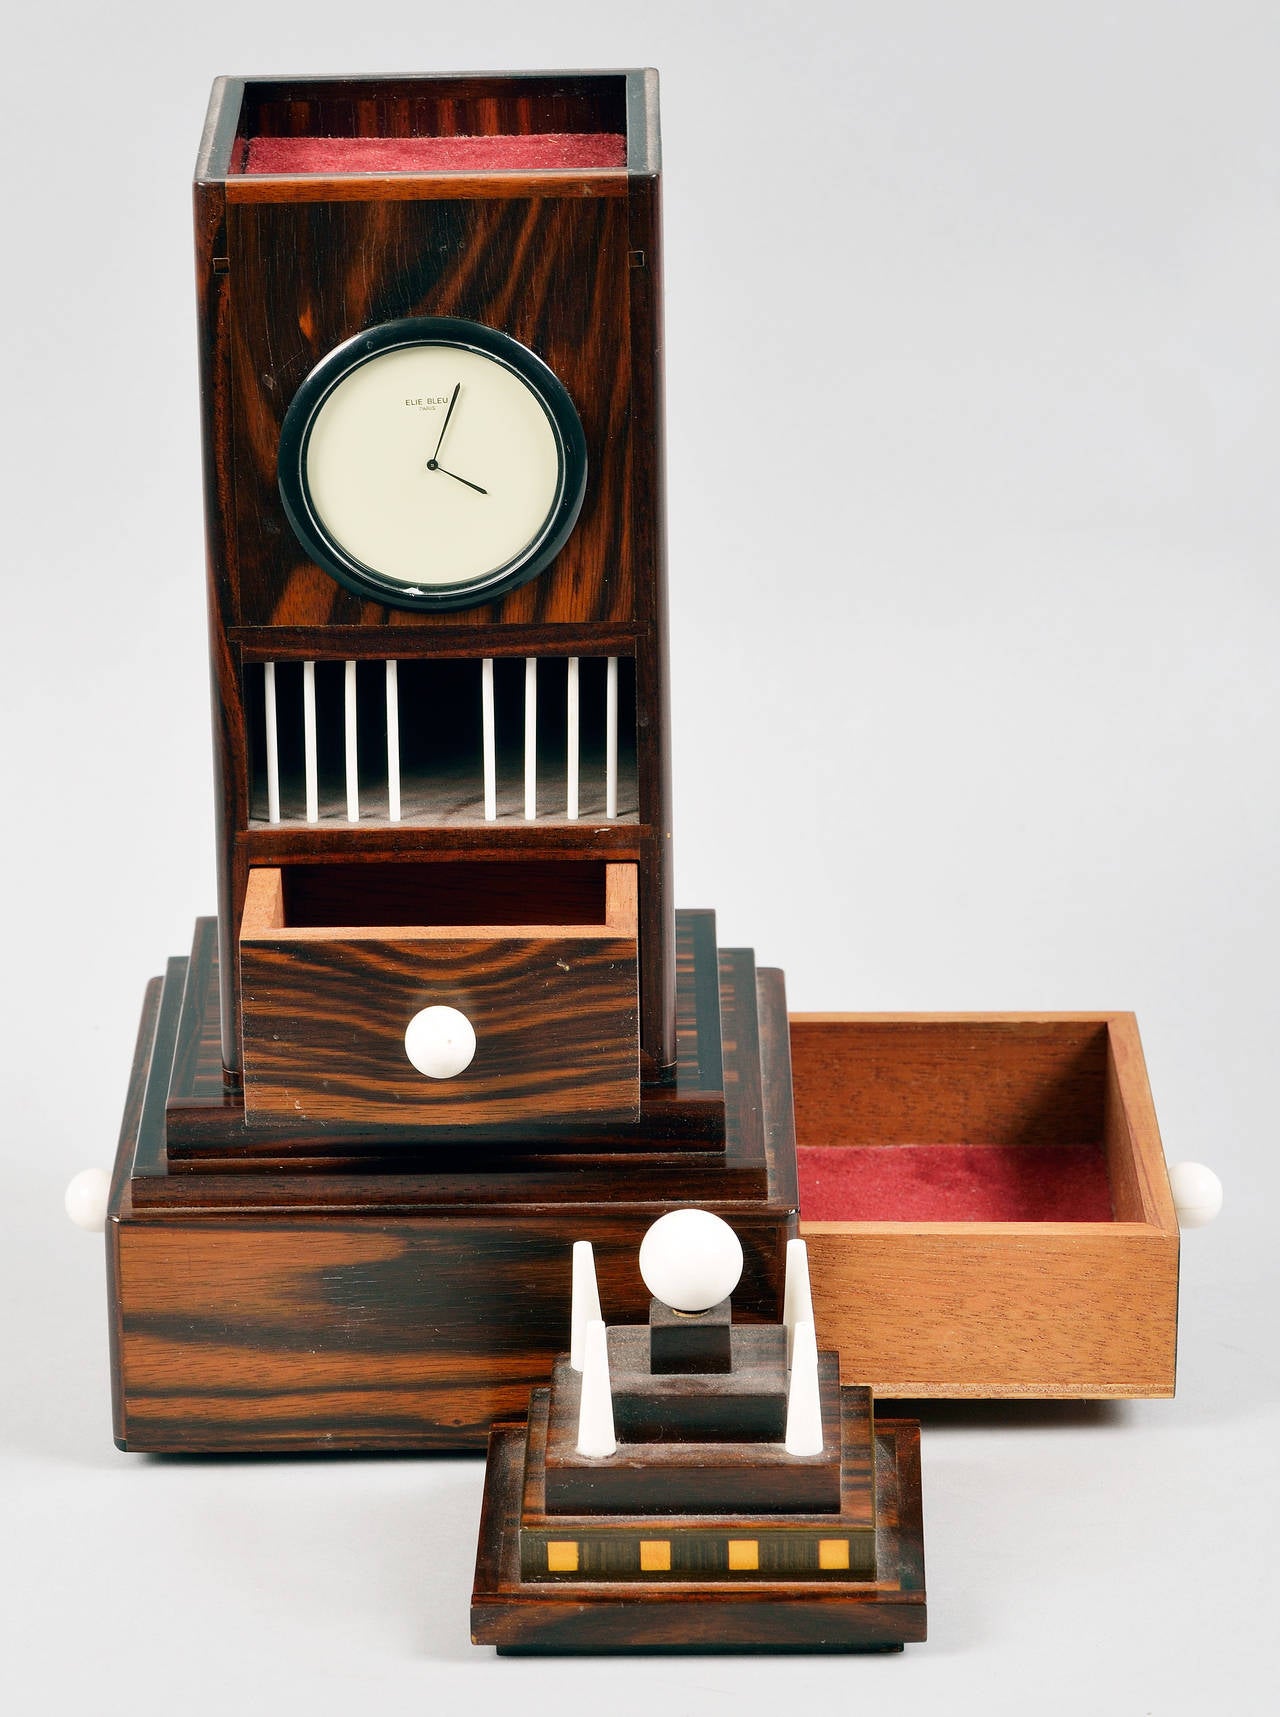 An elegantly constructed incense burner with watch and drawers.
By Elie Bleu, a French 'tabletier